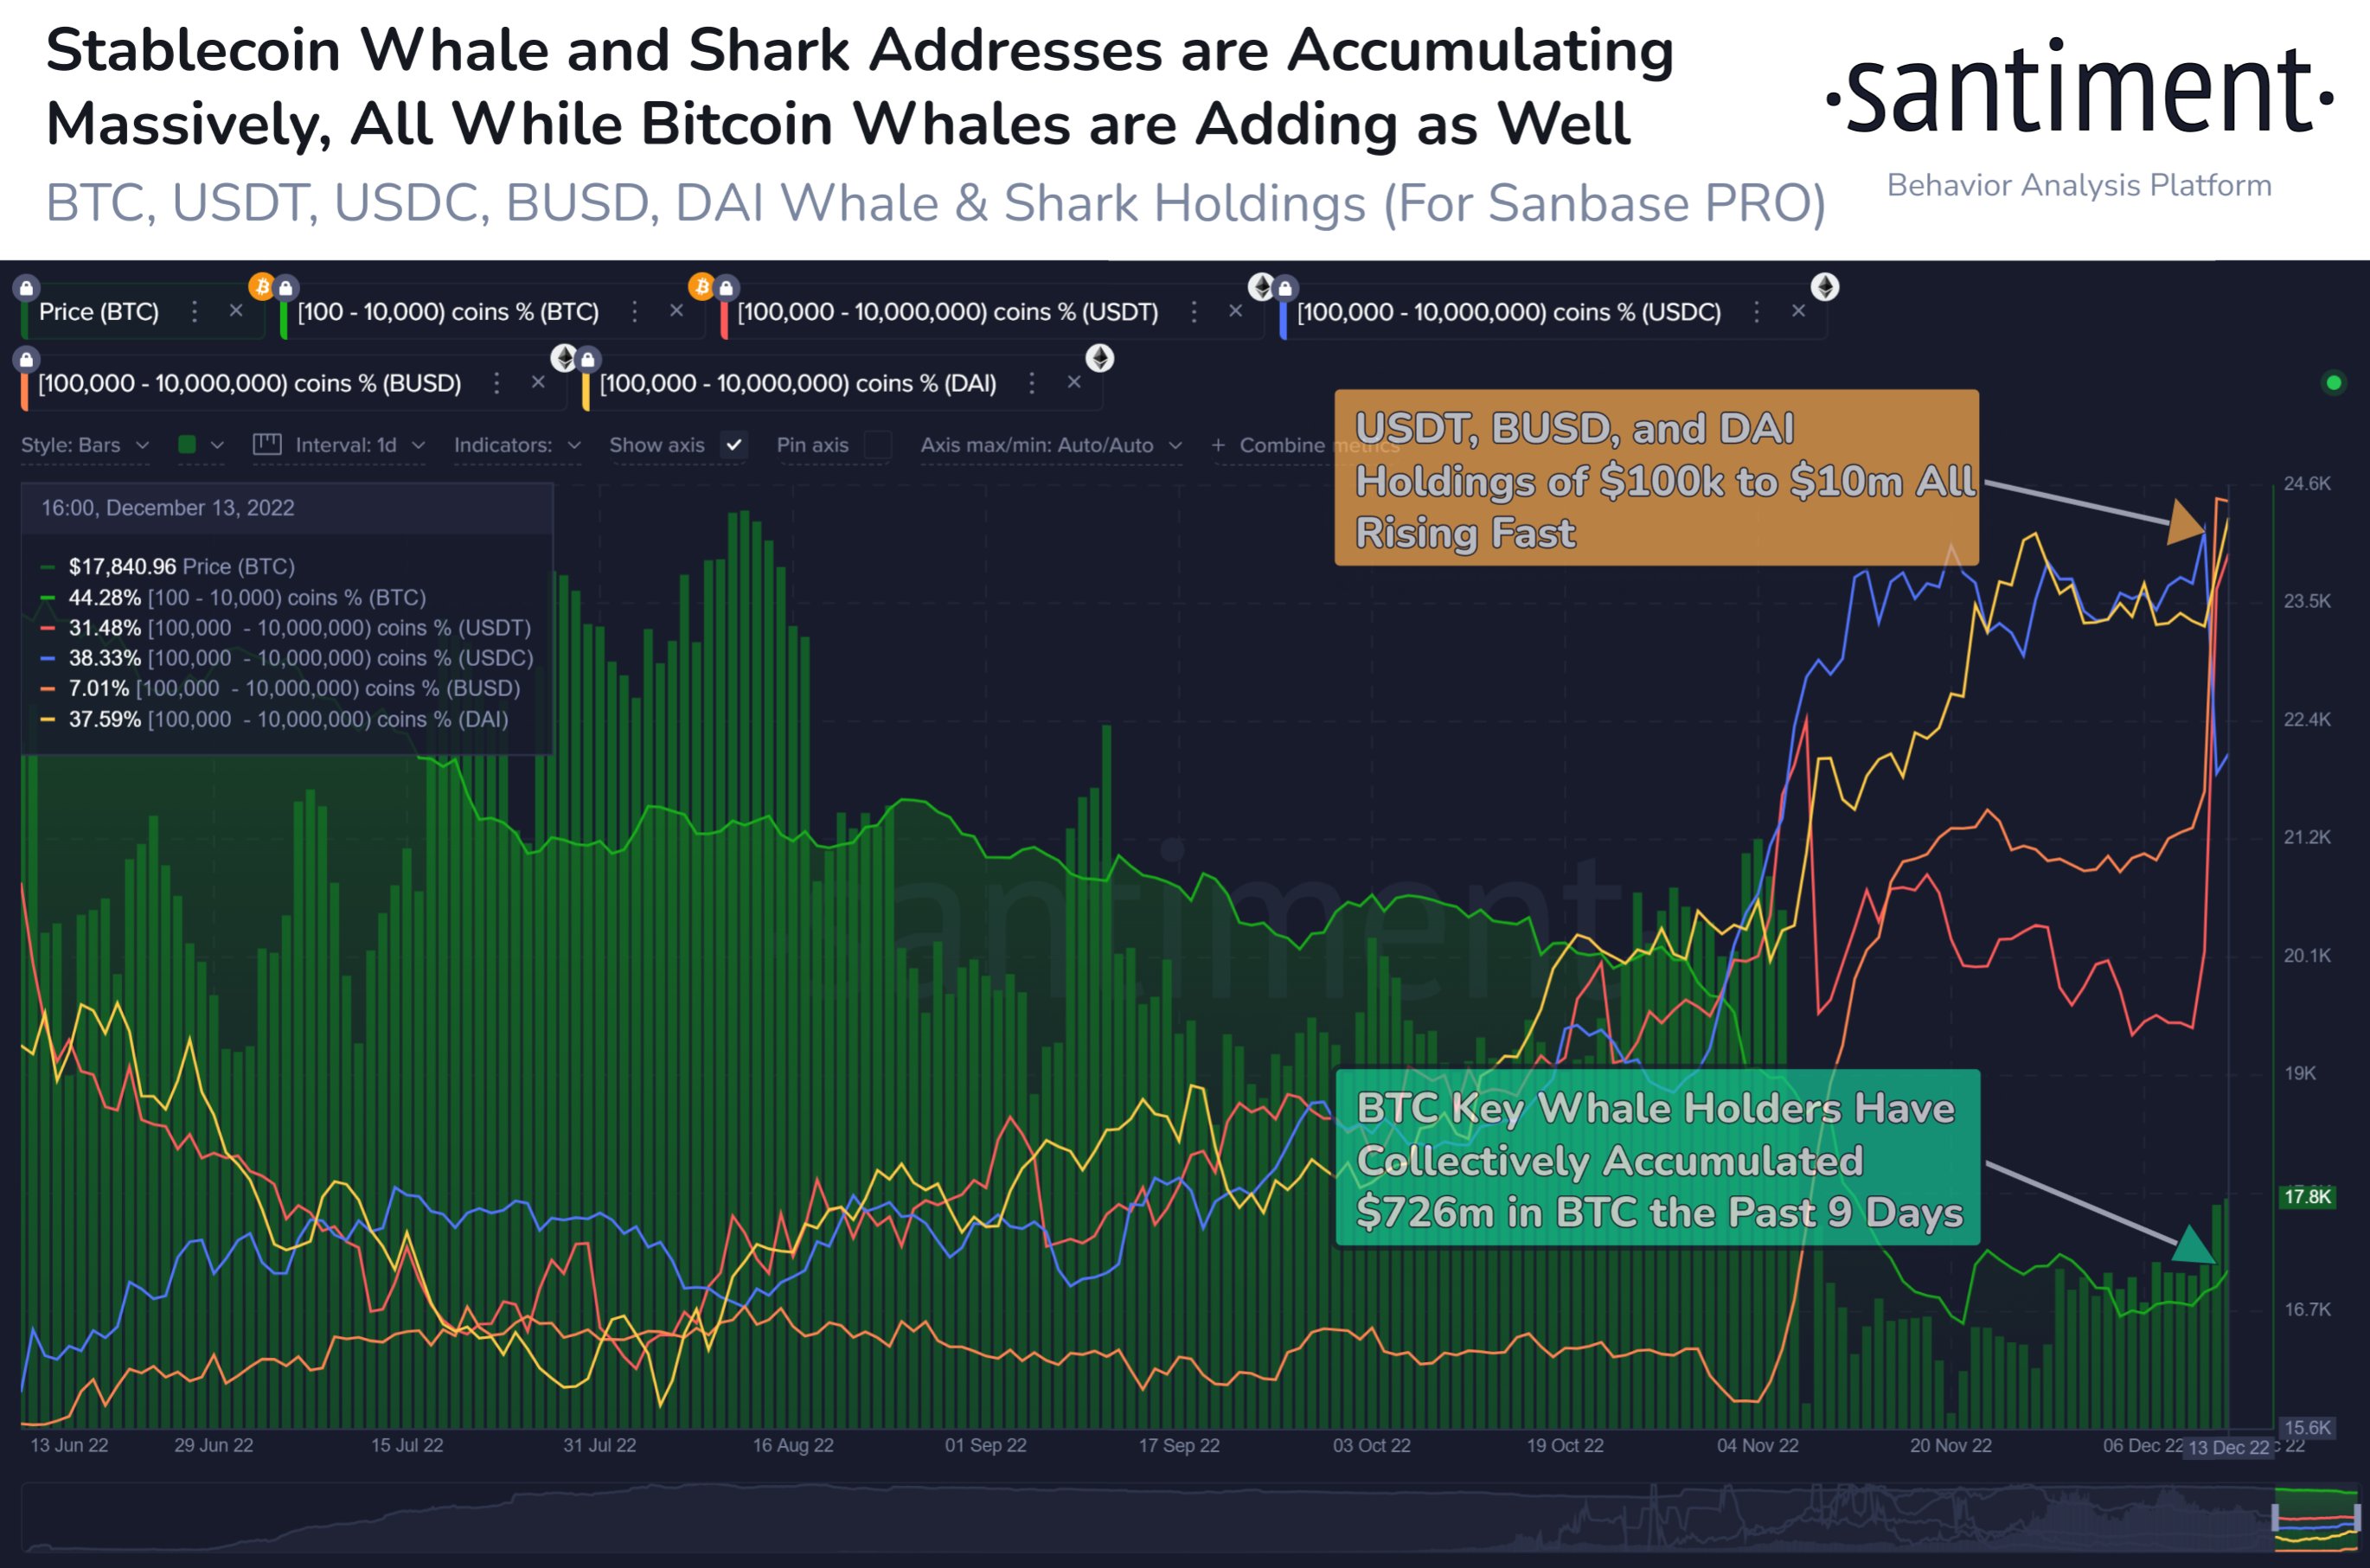 Accumulation of BTC, USDT, BUSD and DAI by whales